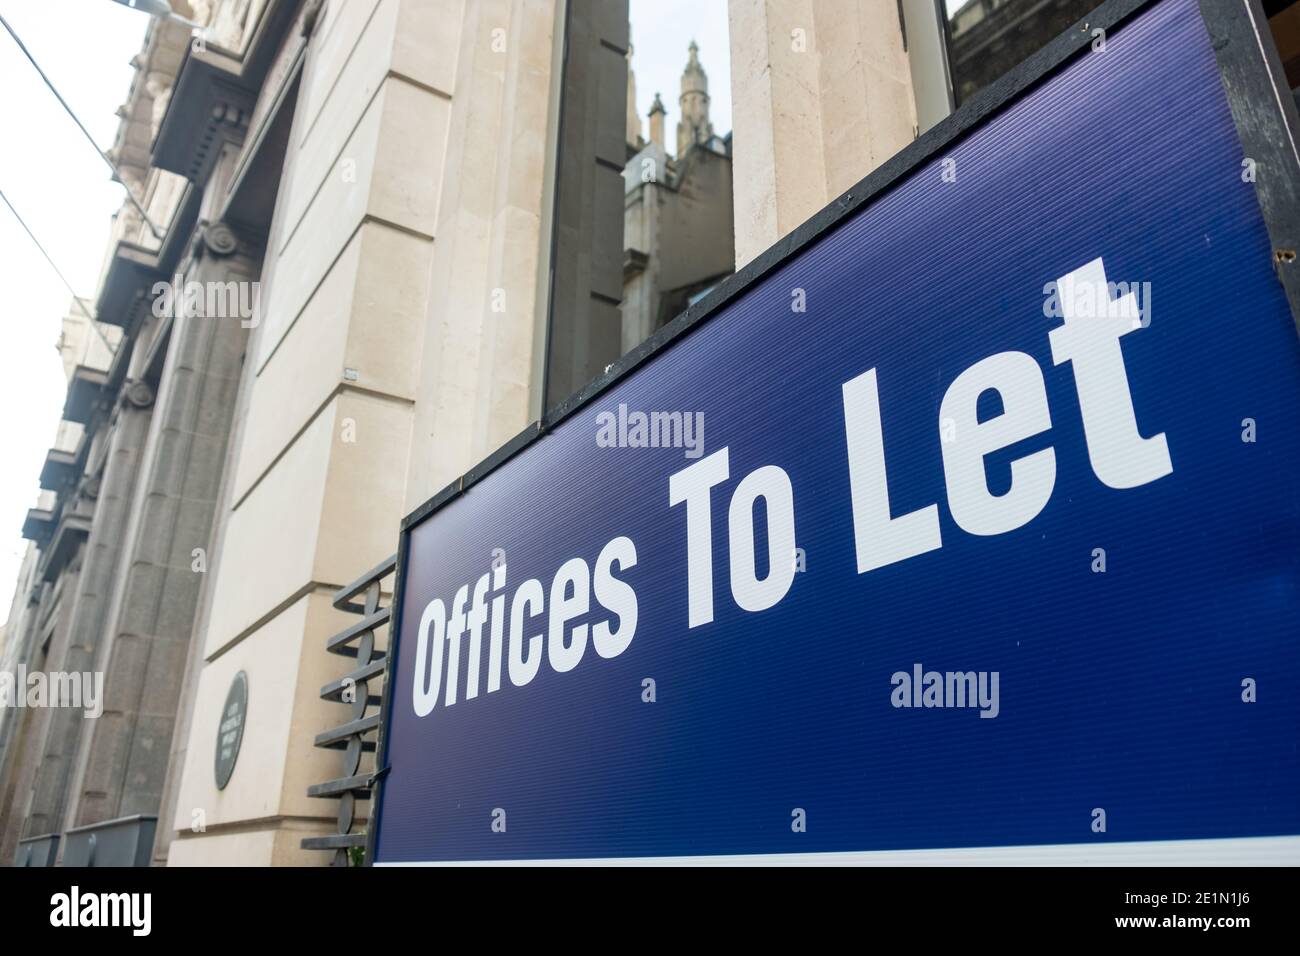 Offices to Let sign in built up city area Stock Photo